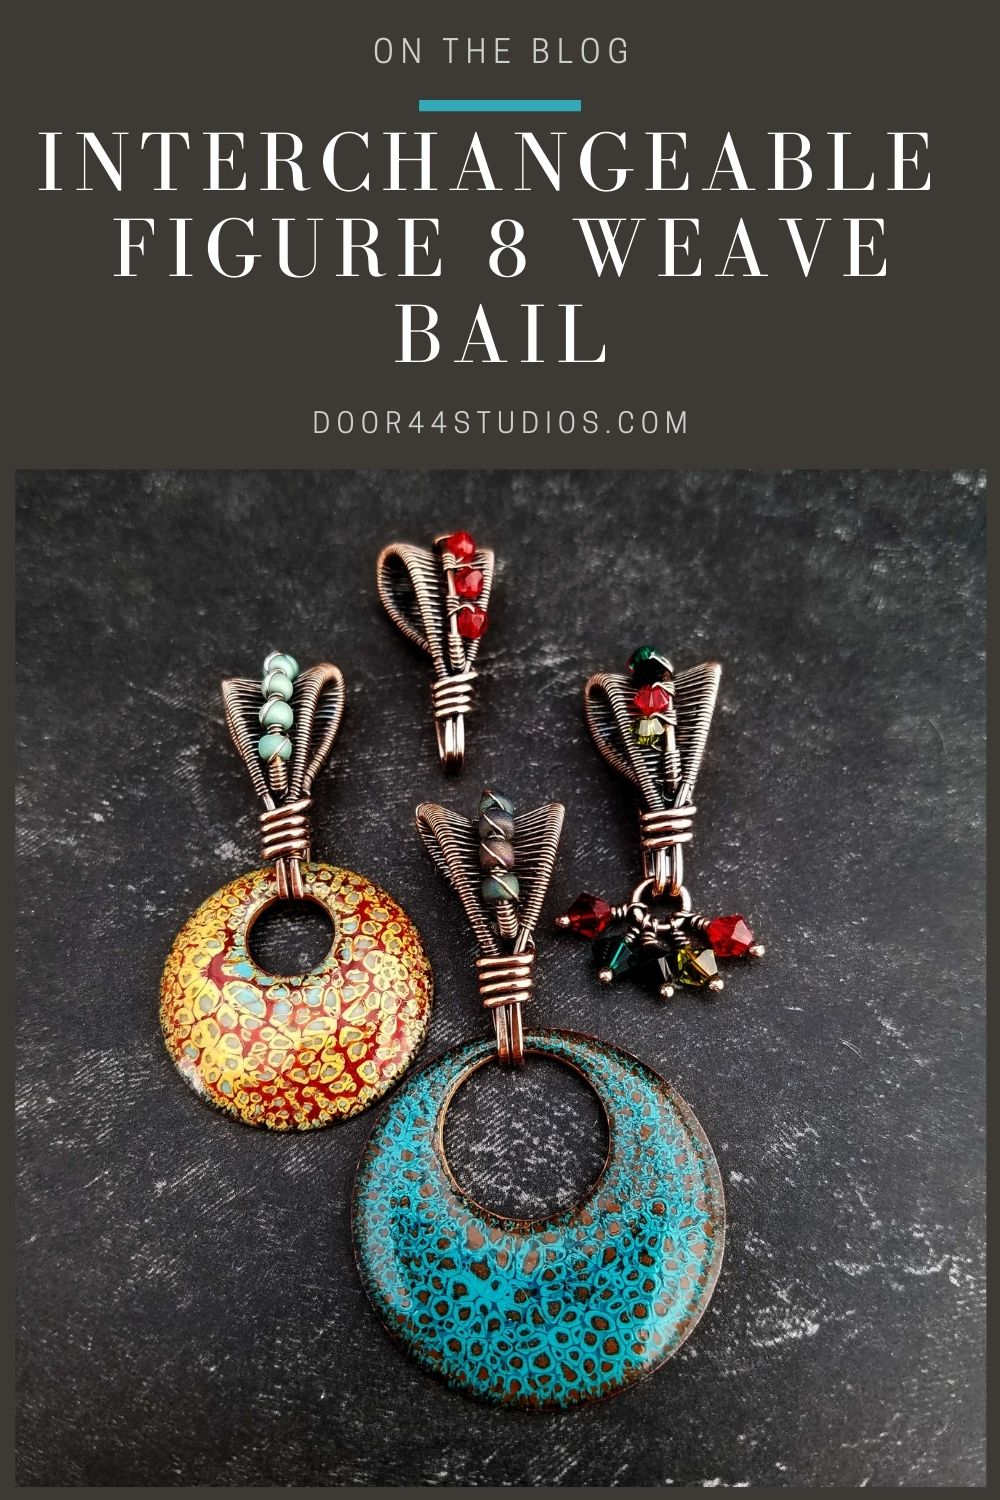 Have you ever wanted a pendant bail that would allow you to swap out different pendants and embellishments? If so, this interchangeable bail featuring the Figure 8 weave and a pretty beaded accent is the solution you've been looking for. Learn to make this versatile bail with our free tutorial.